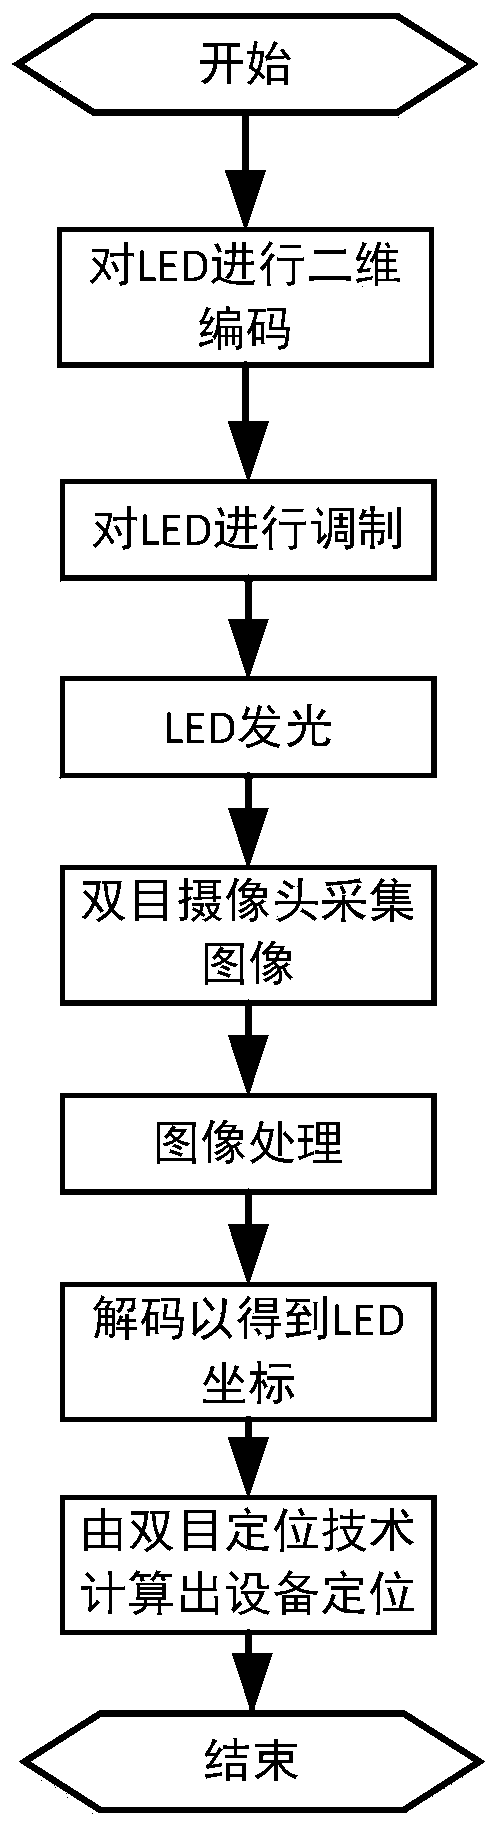 Two-dimensional encoding and decoding method of visible light locating